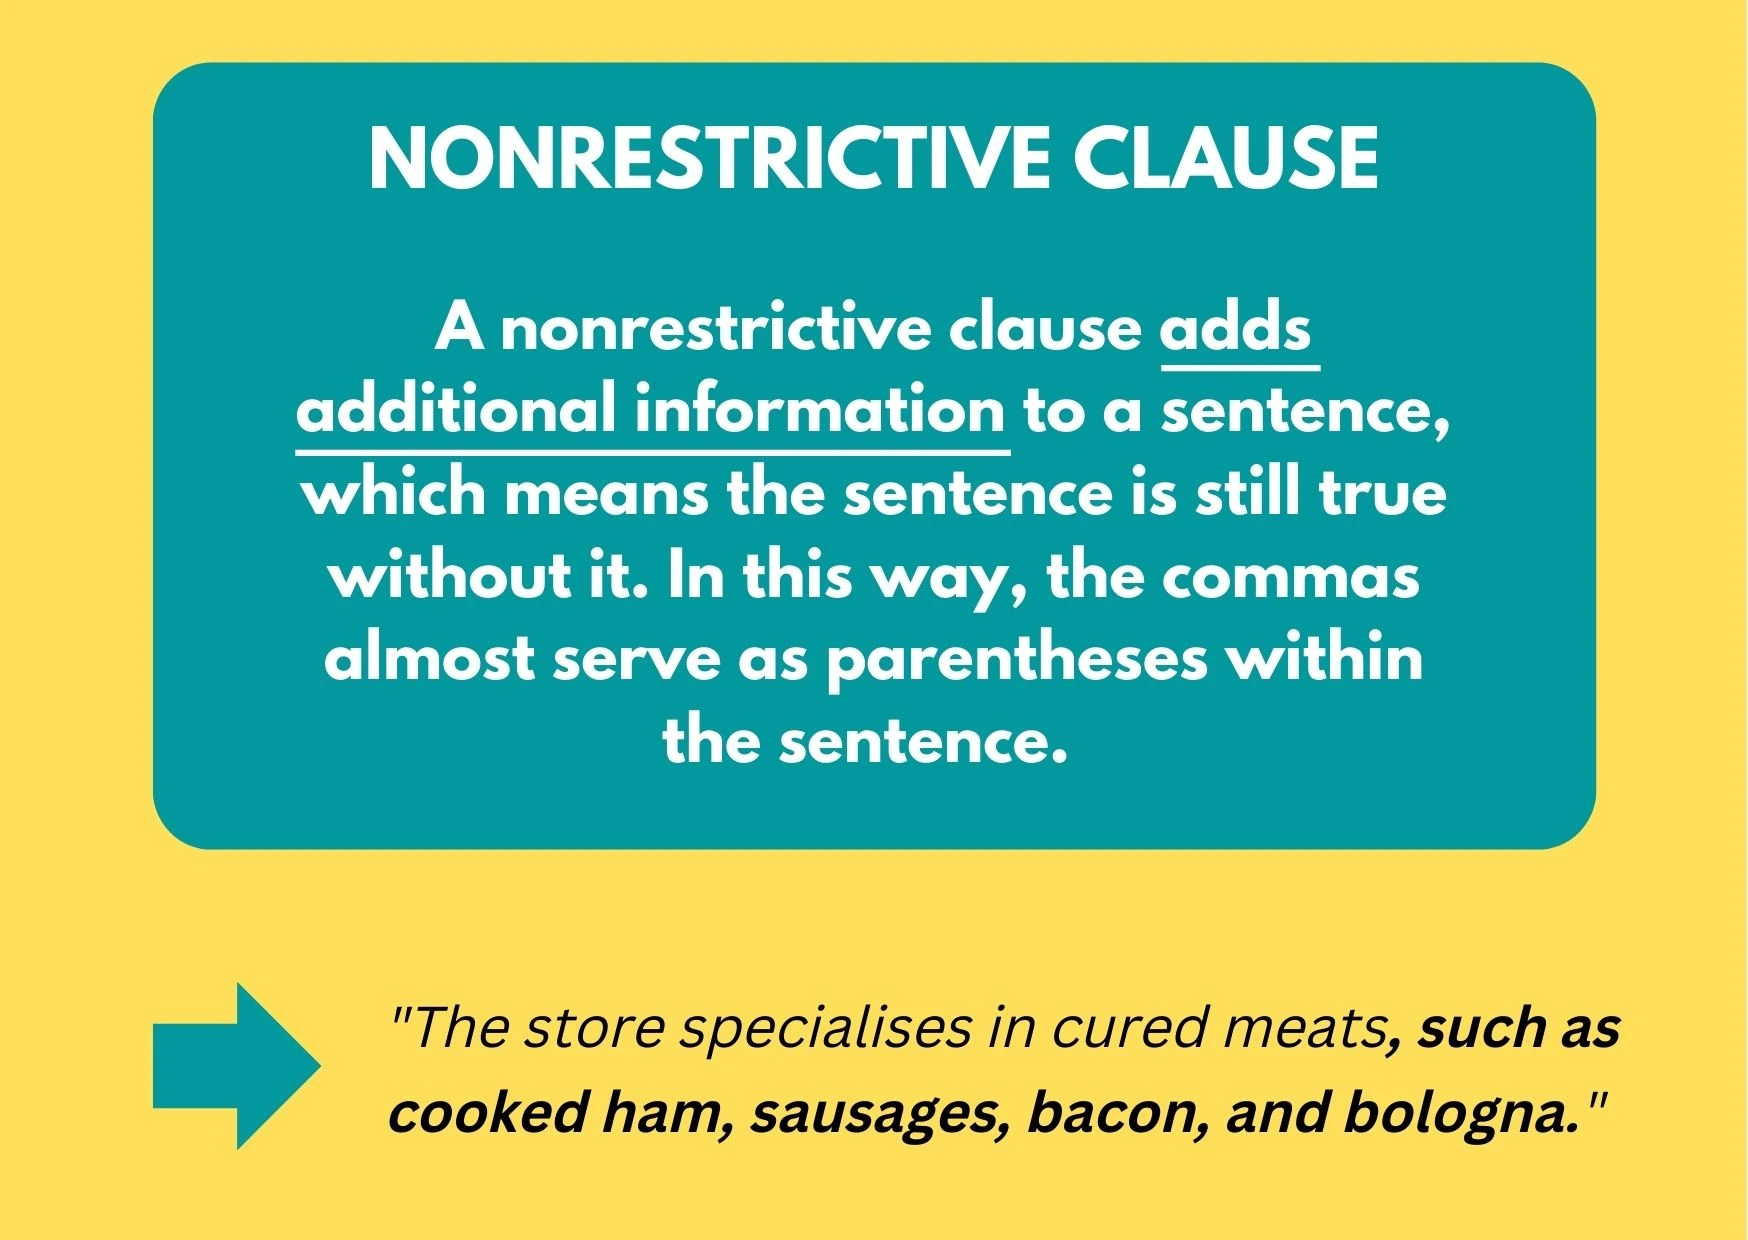 A graphic giving the definition of a Nonrestrictive Clause: A nonrestrictive clause adds additional information to a sentence, which means the sentence is still true without it. In this way, the commas almost serve as parentheses within the sentence. 